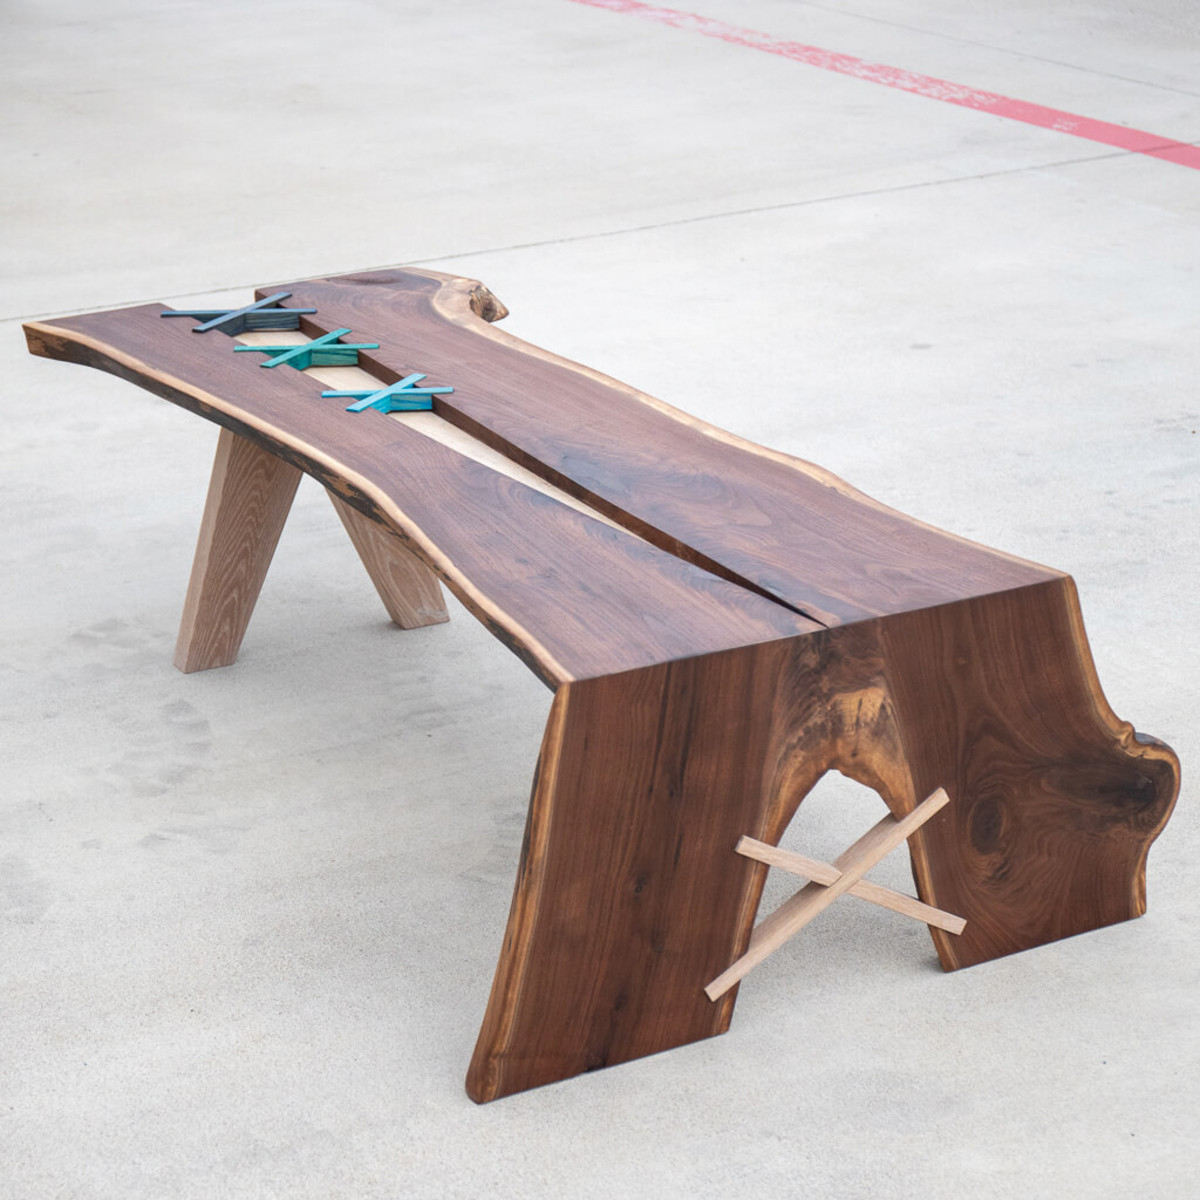 “The Amsterdam”, a walnut coffee table by Team 2